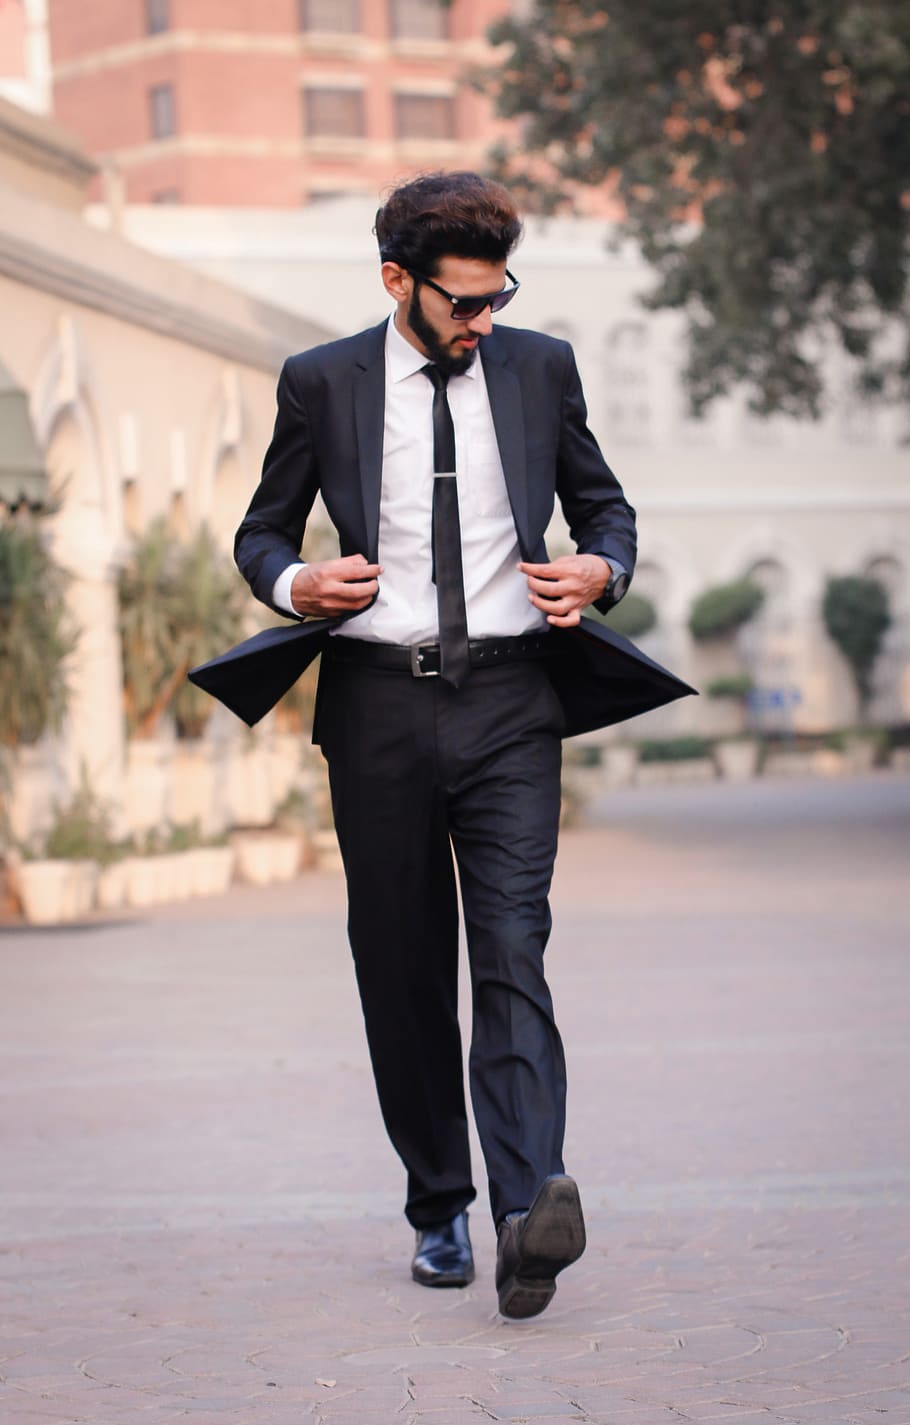 man, fashion, business, suit, tie, lifestyle, fine-looking, urban, wear, outdoors